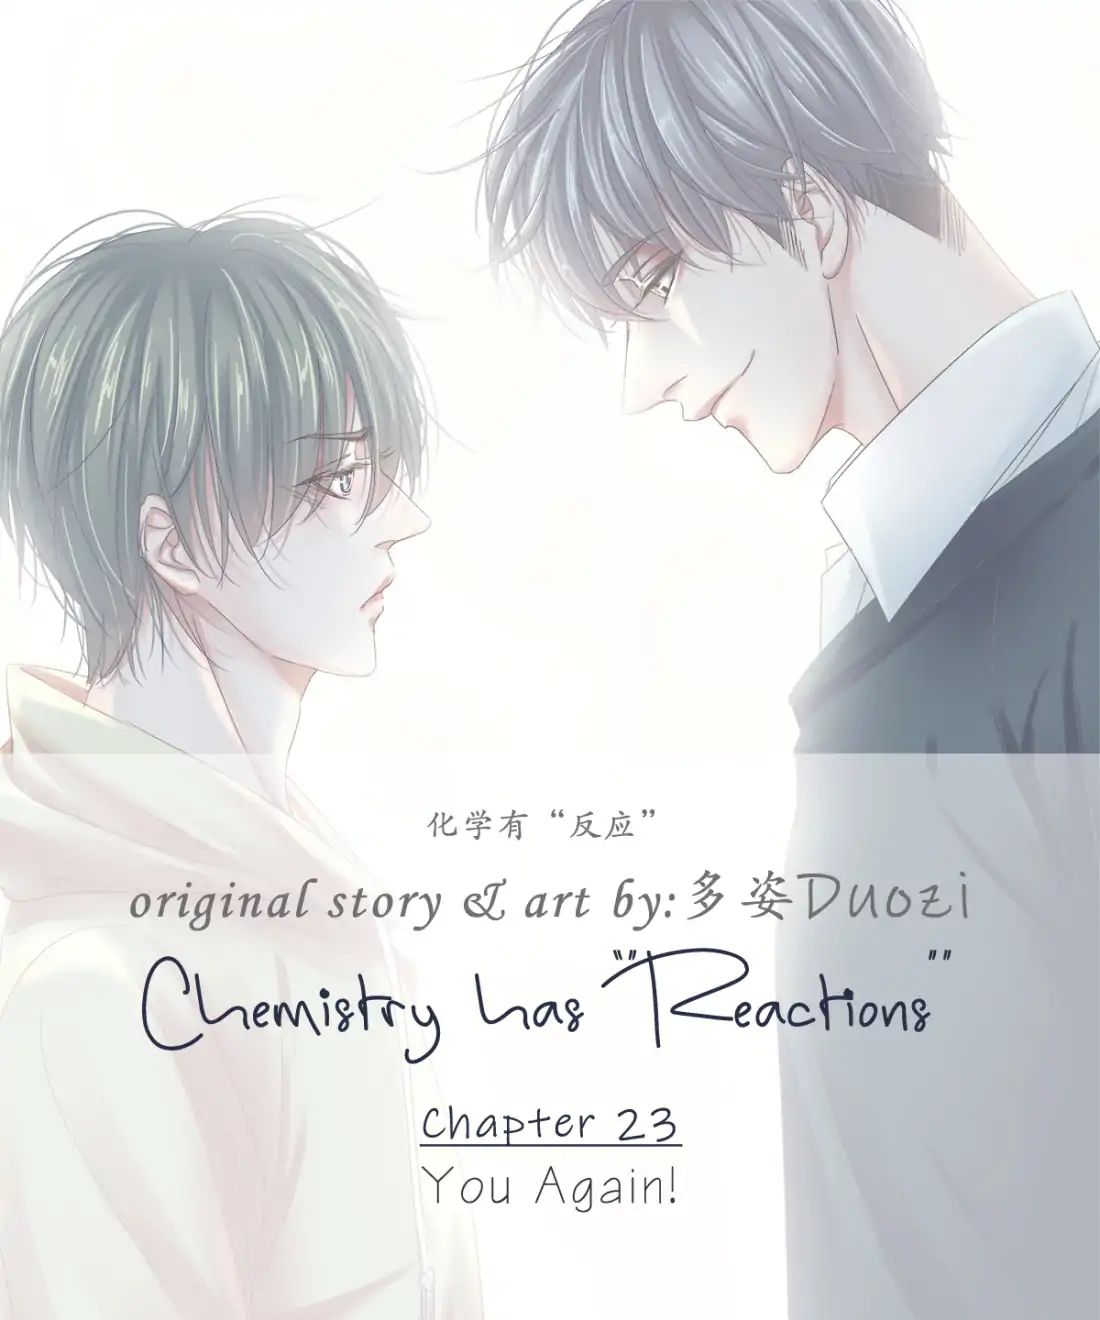 Chemistry Has "reactions" Chapter 23 #1